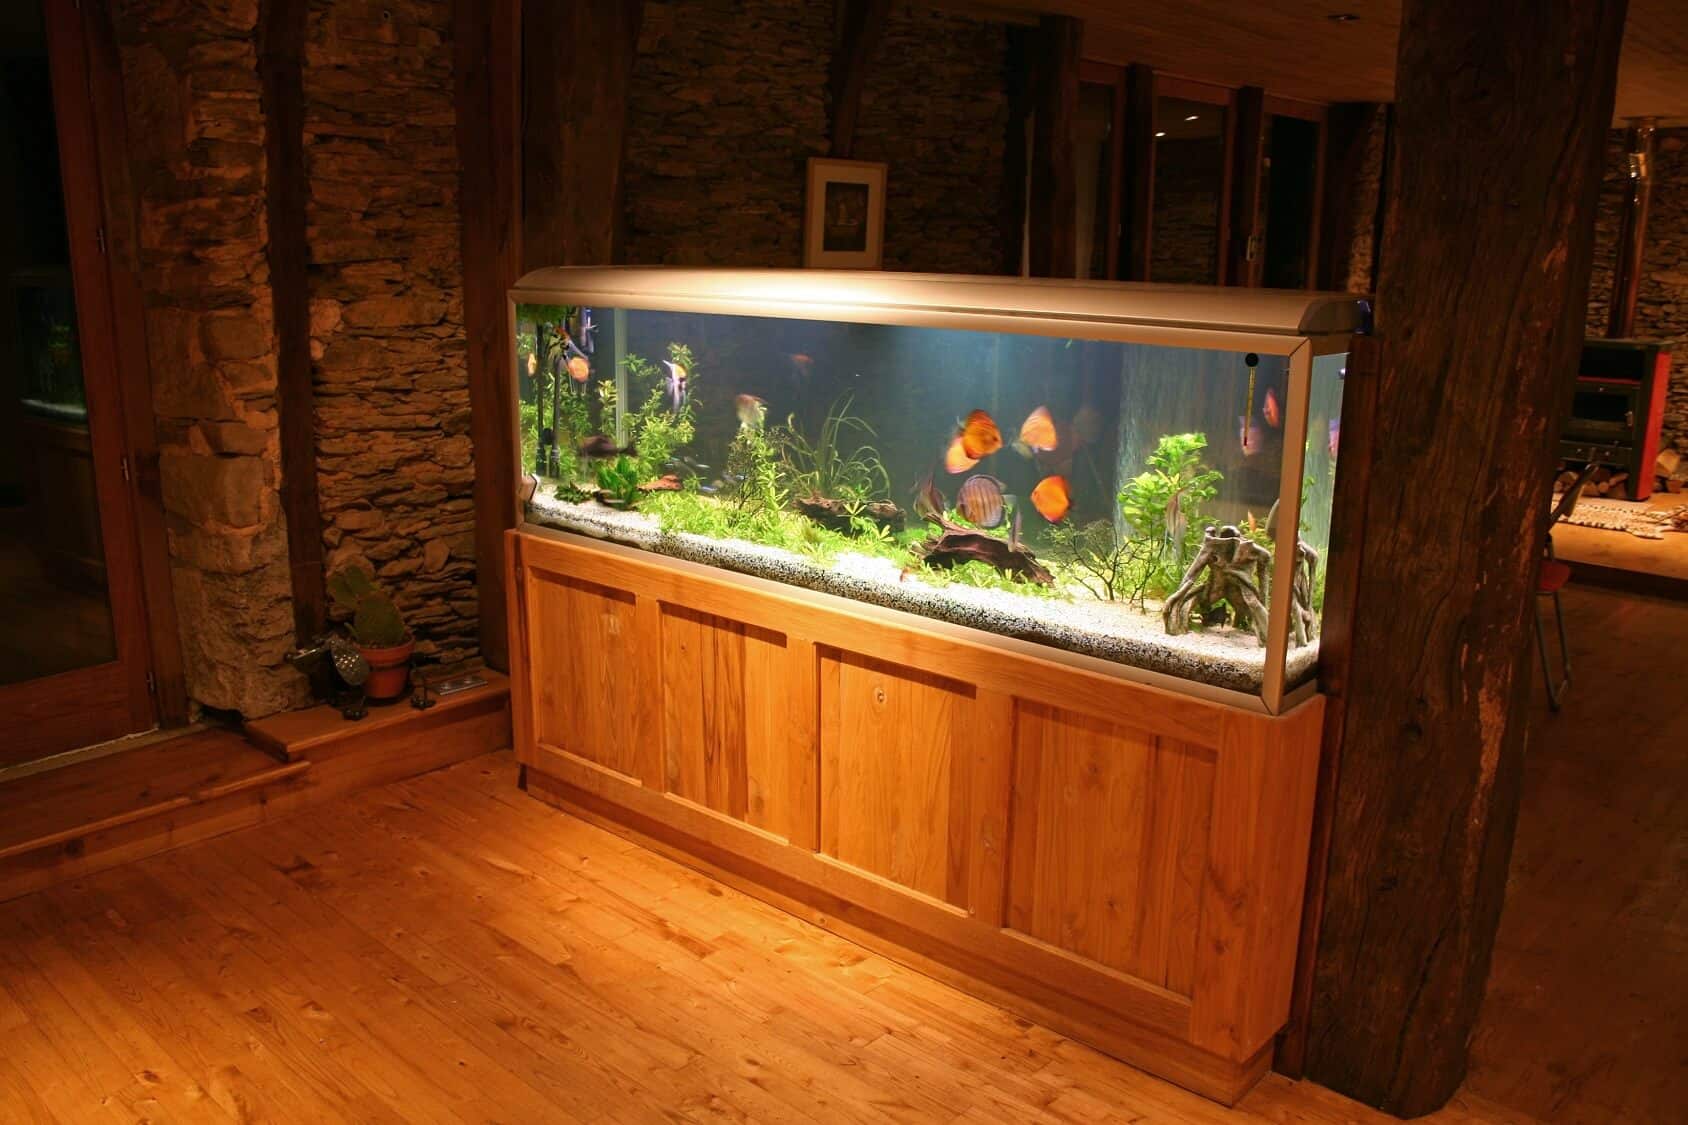 How long is 75 gallon tank?